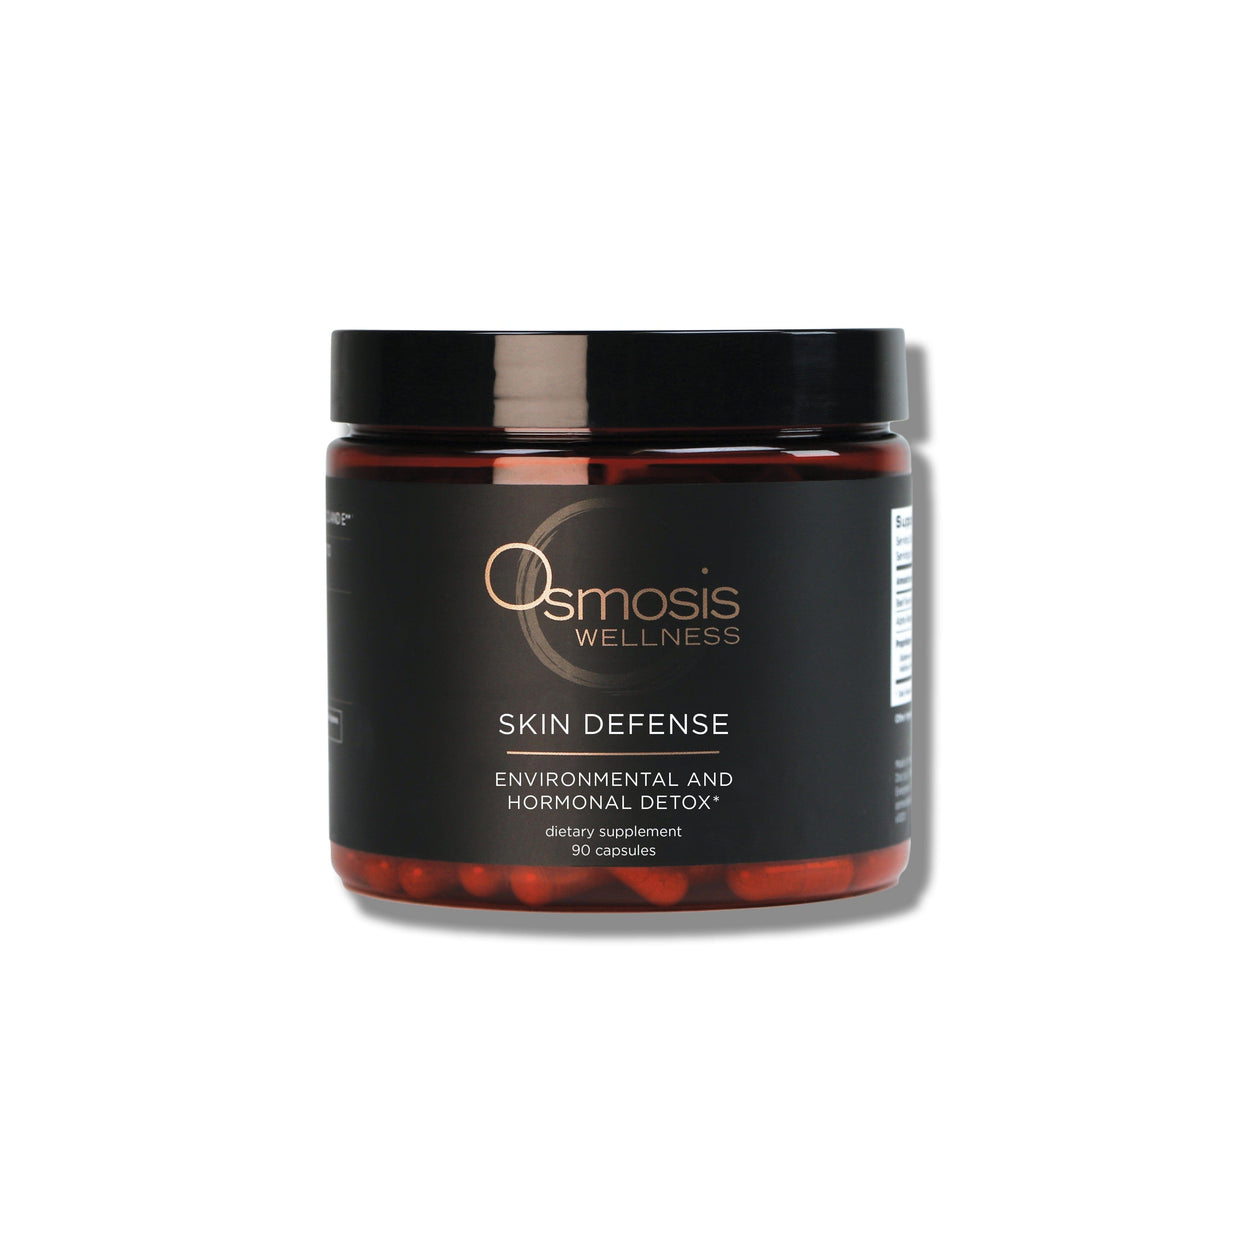 Osmosis Wellness Skin Defense 90 Capsules Osmosis Beauty 90 Capsules Shop at Exclusive Beauty Club